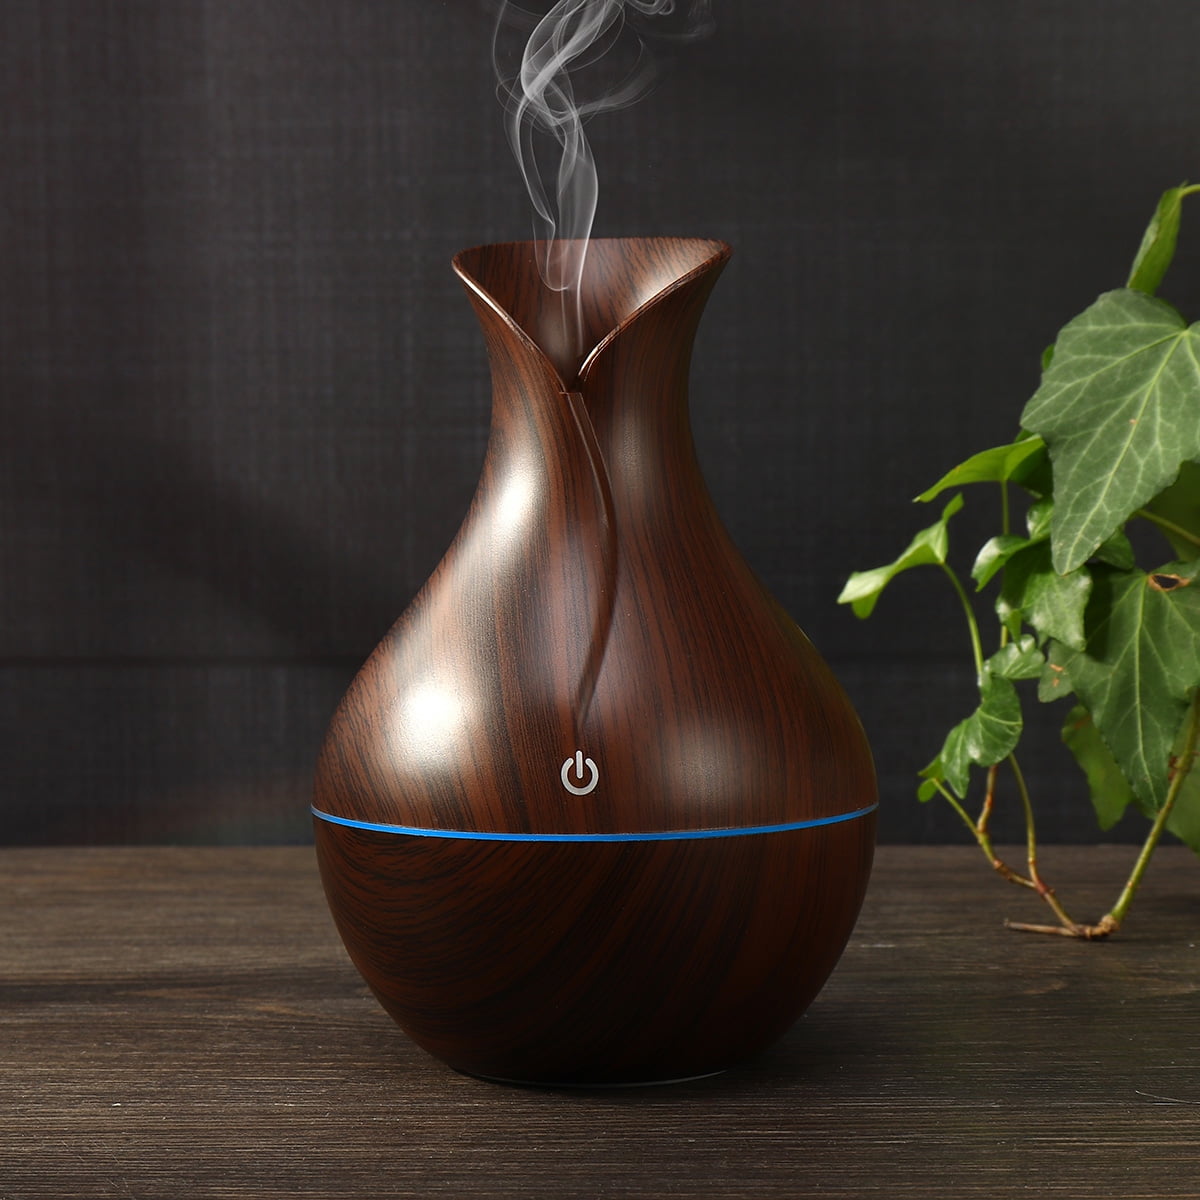 Diffuser Ultrasonic Mist Air Humidifier with Color-changing LED Lights Details about    UK plug 